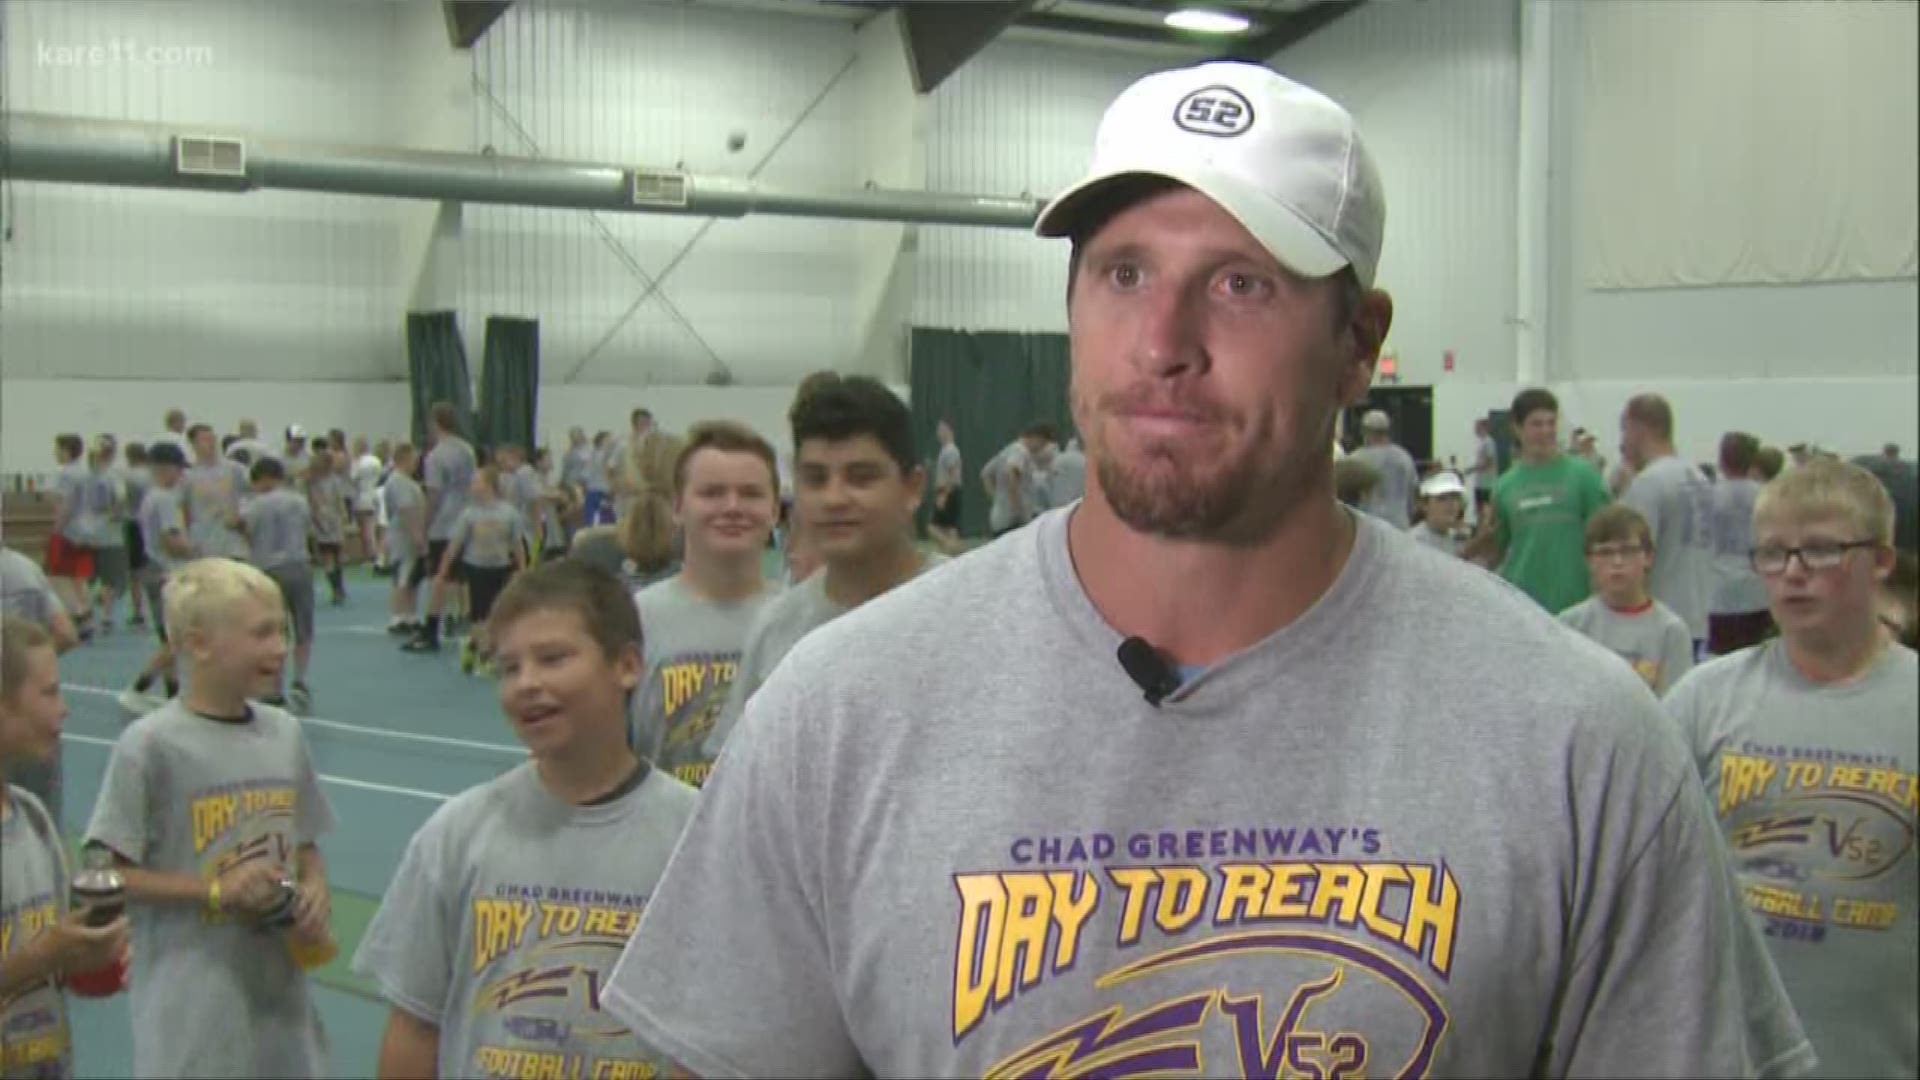 Chad Greenway talks about his football camp in Hutchinson on Thursday